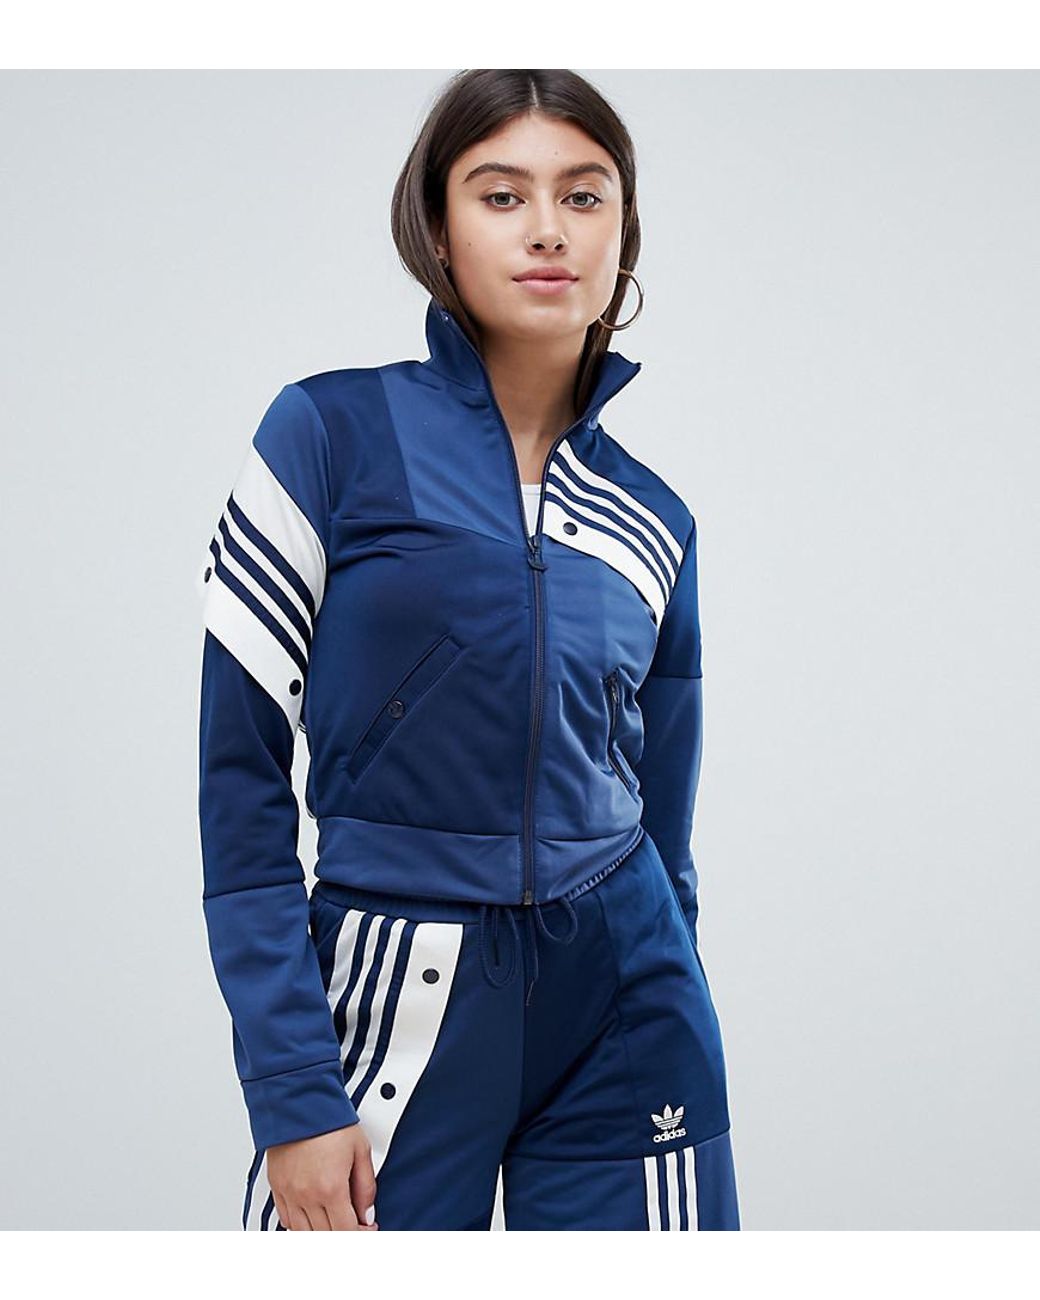 adidas Originals X Danielle Cathari Deconstructed Track Top In Navy in Blue  | Lyst